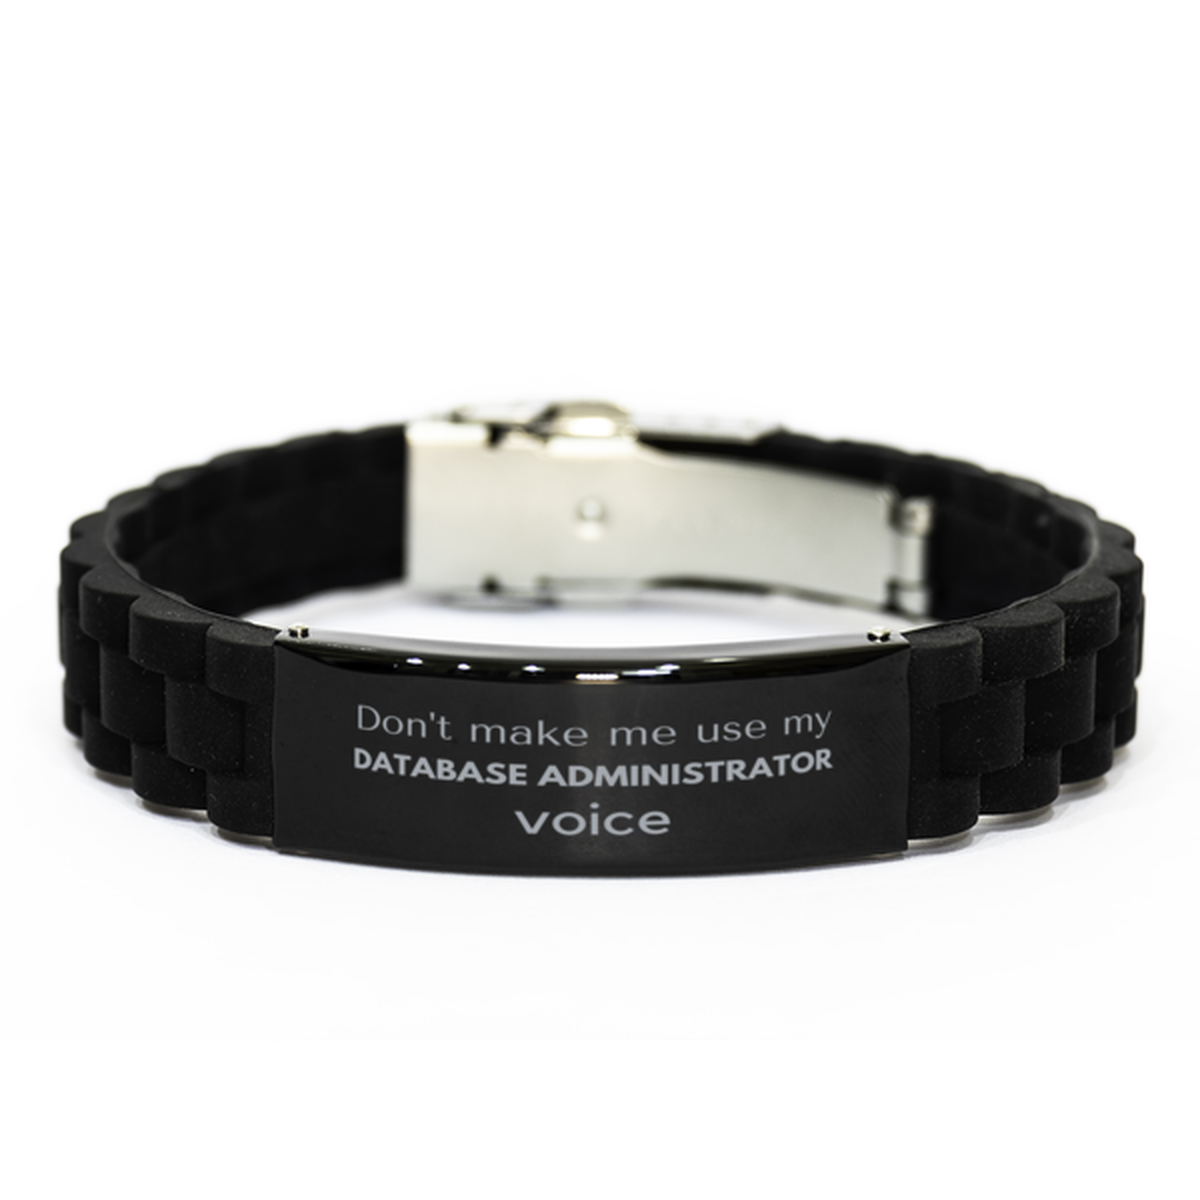 Don't make me use my Database Administrator voice, Sarcasm Database Administrator Gifts, Christmas Database Administrator Black Glidelock Clasp Bracelet Birthday Unique Gifts For Database Administrator Coworkers, Men, Women, Colleague, Friends